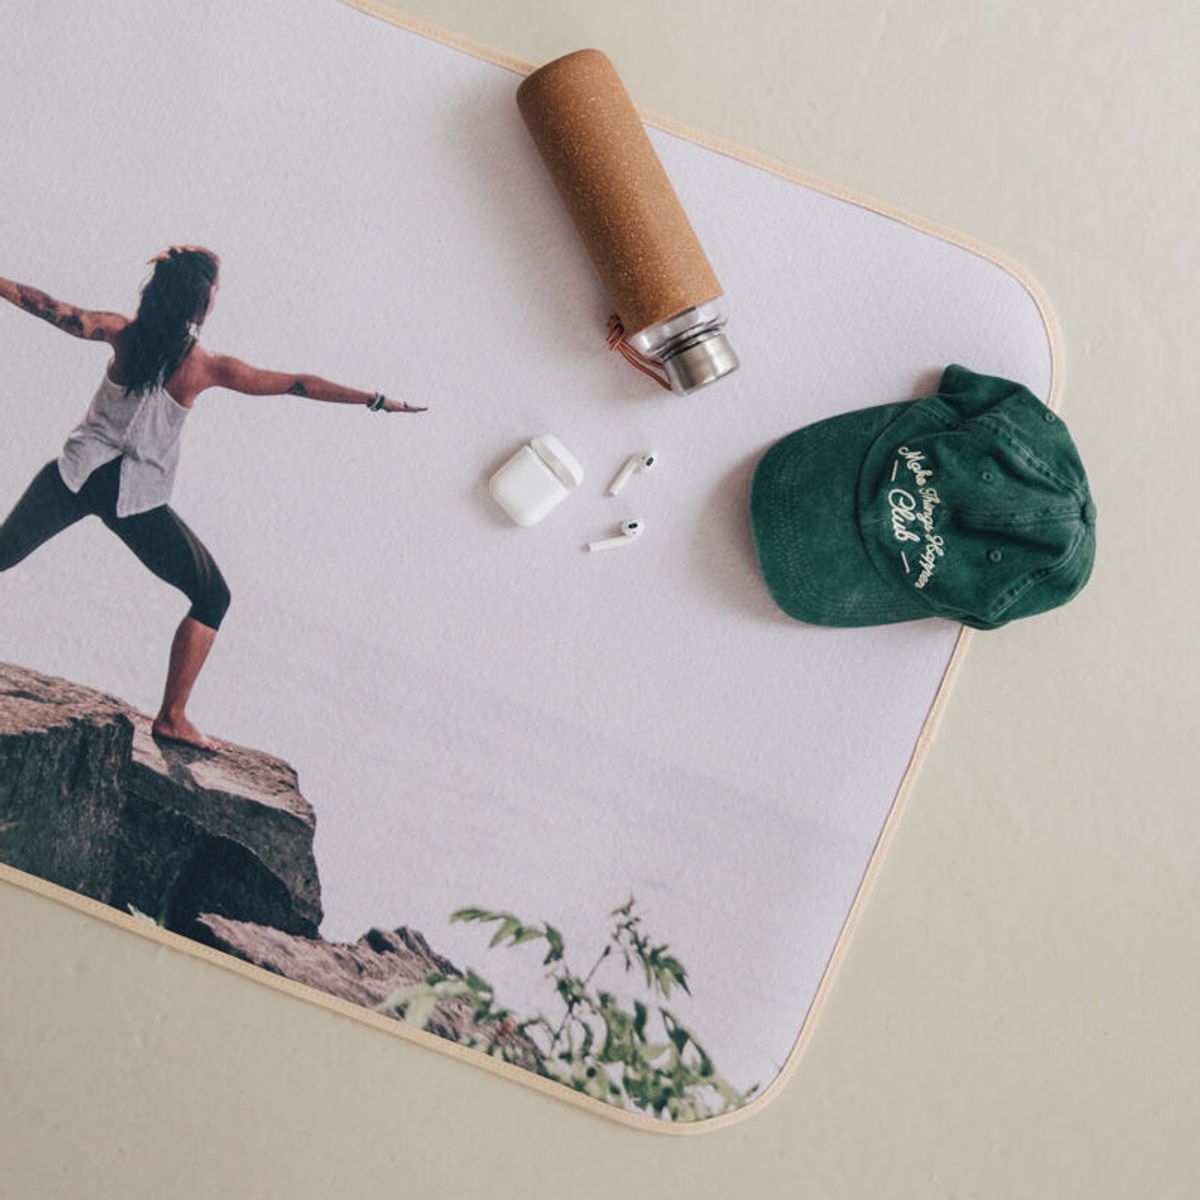 design your own yoga mat with printed vacation photos